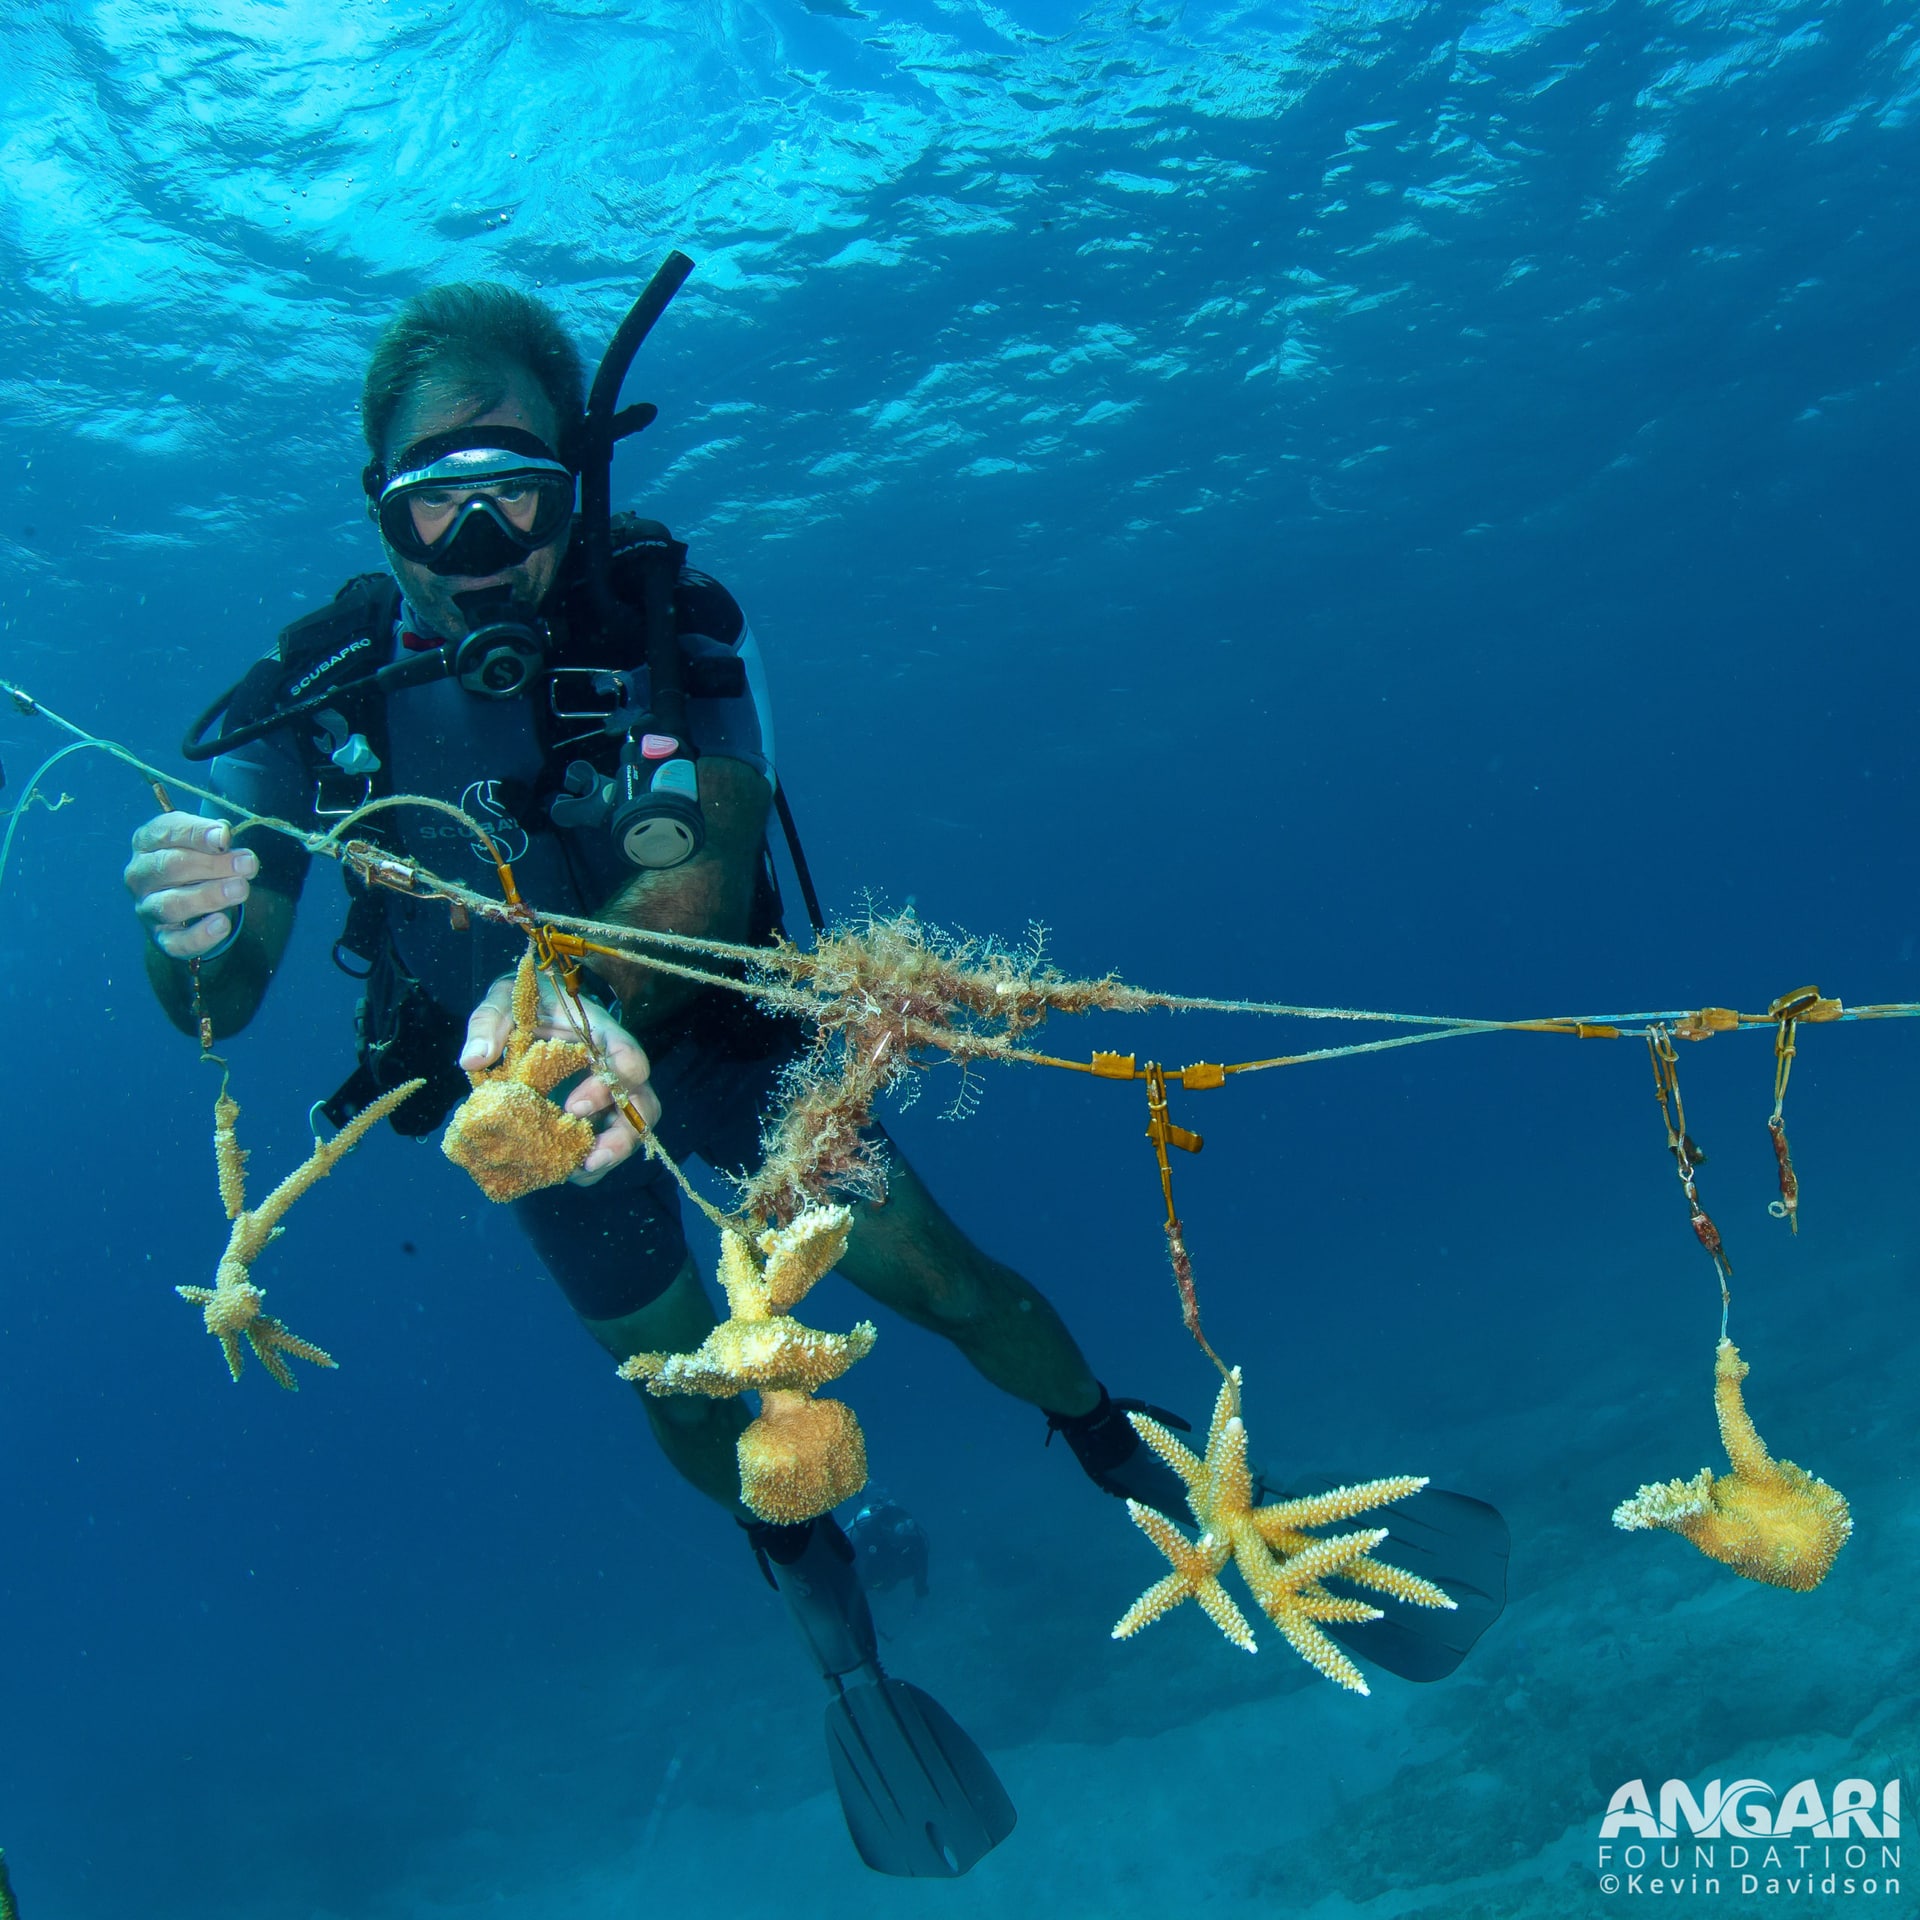 Fixing a Reef Rescue Network coral nursery that was damaged in a recent storm. PC: Kevin Davidson